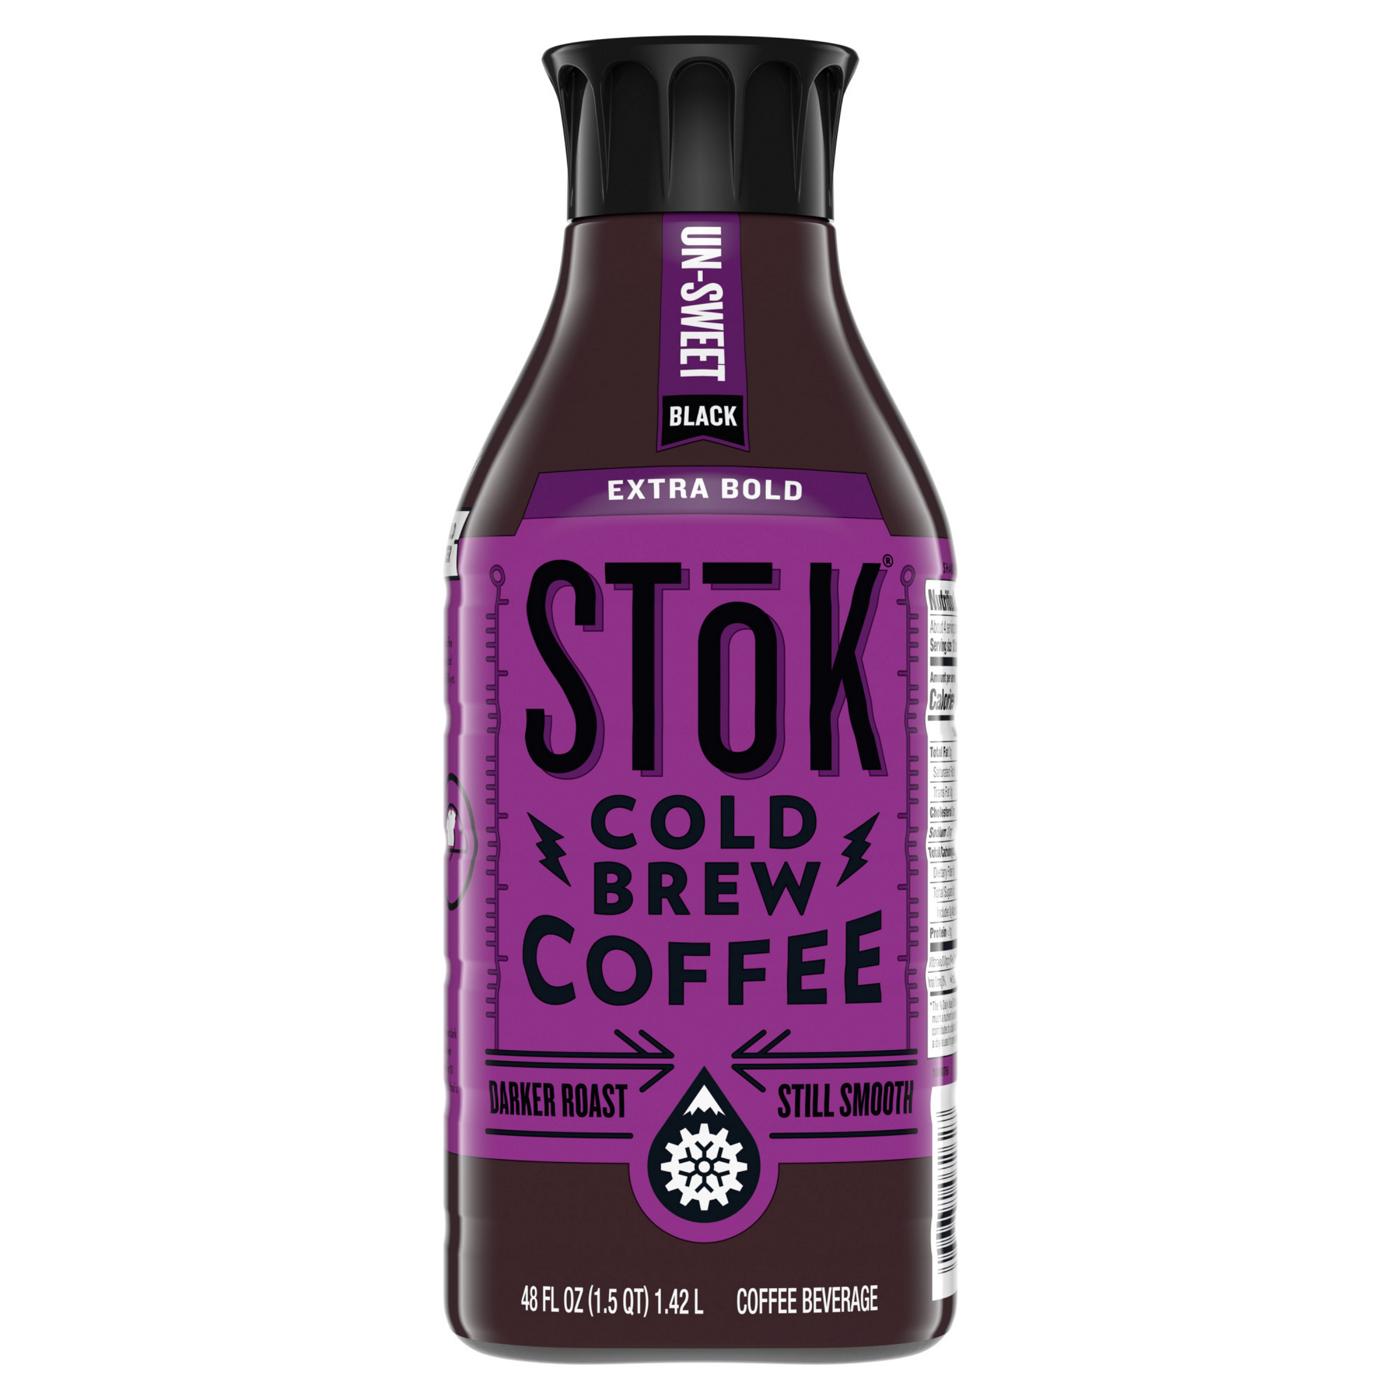 SToK Extra Bold Unsweetened Black Cold Brew Coffee; image 1 of 2